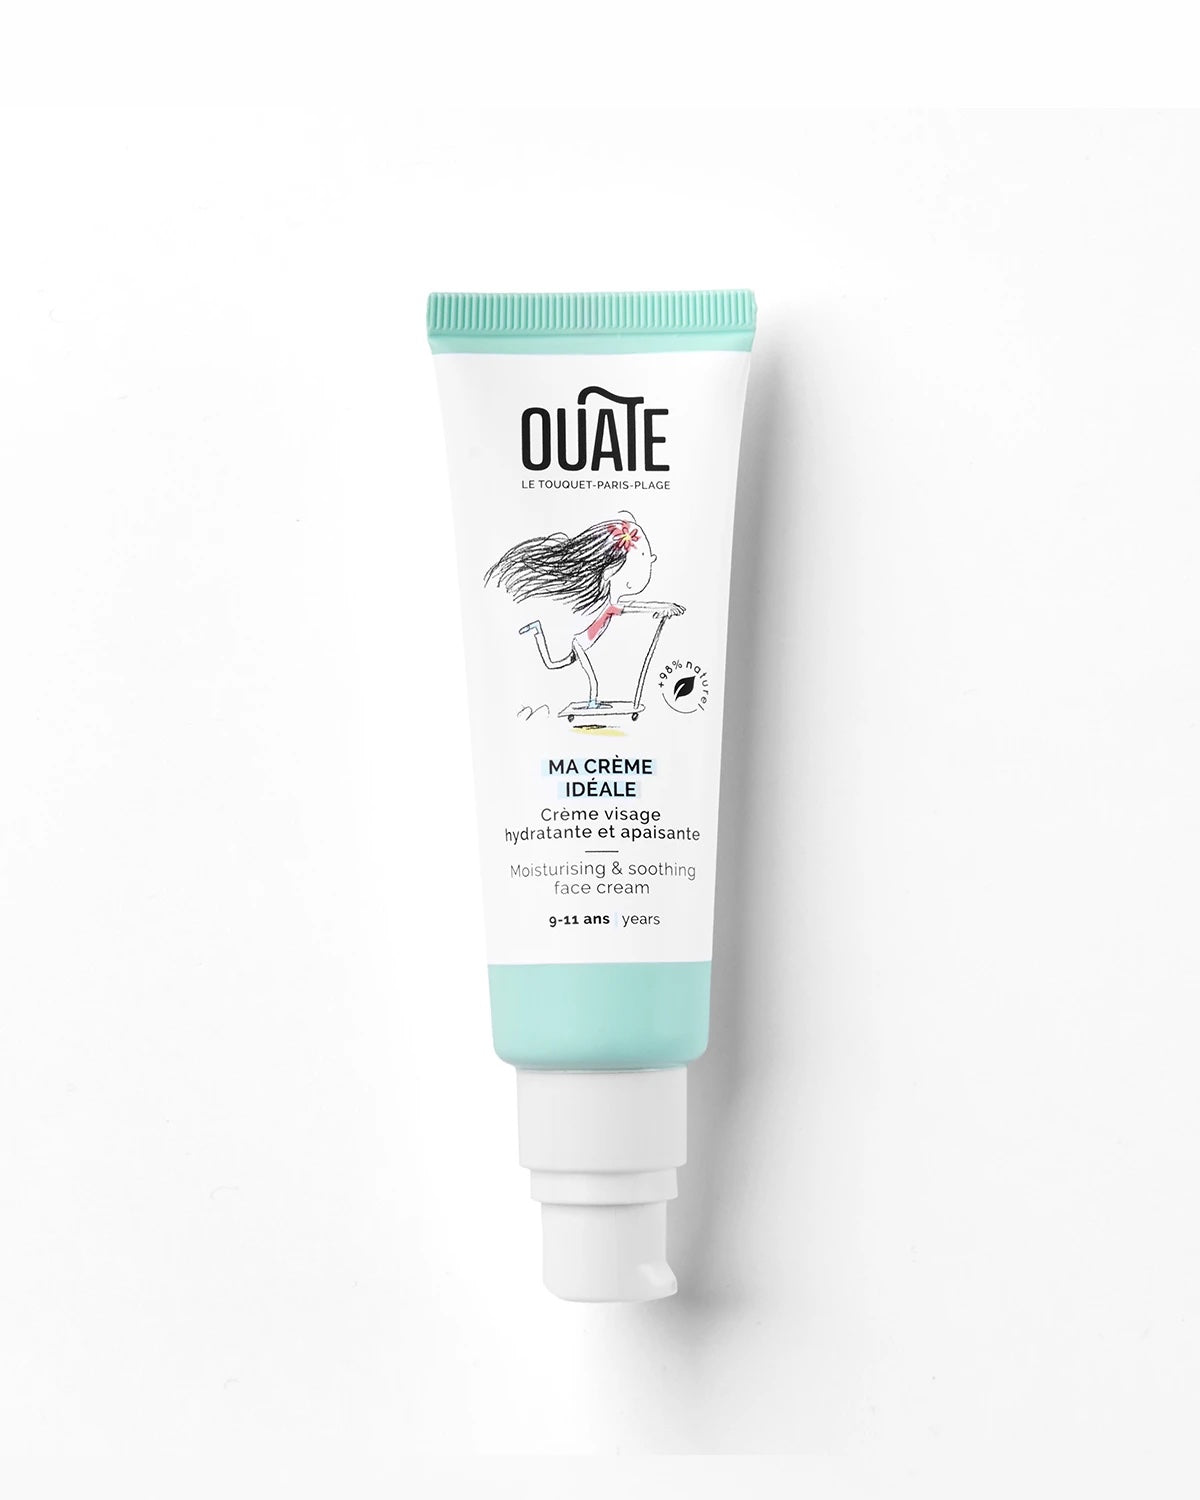 OUATE Duo Set MY IDEAL SKINCARE ROUTINE Girls (ages 9-11)